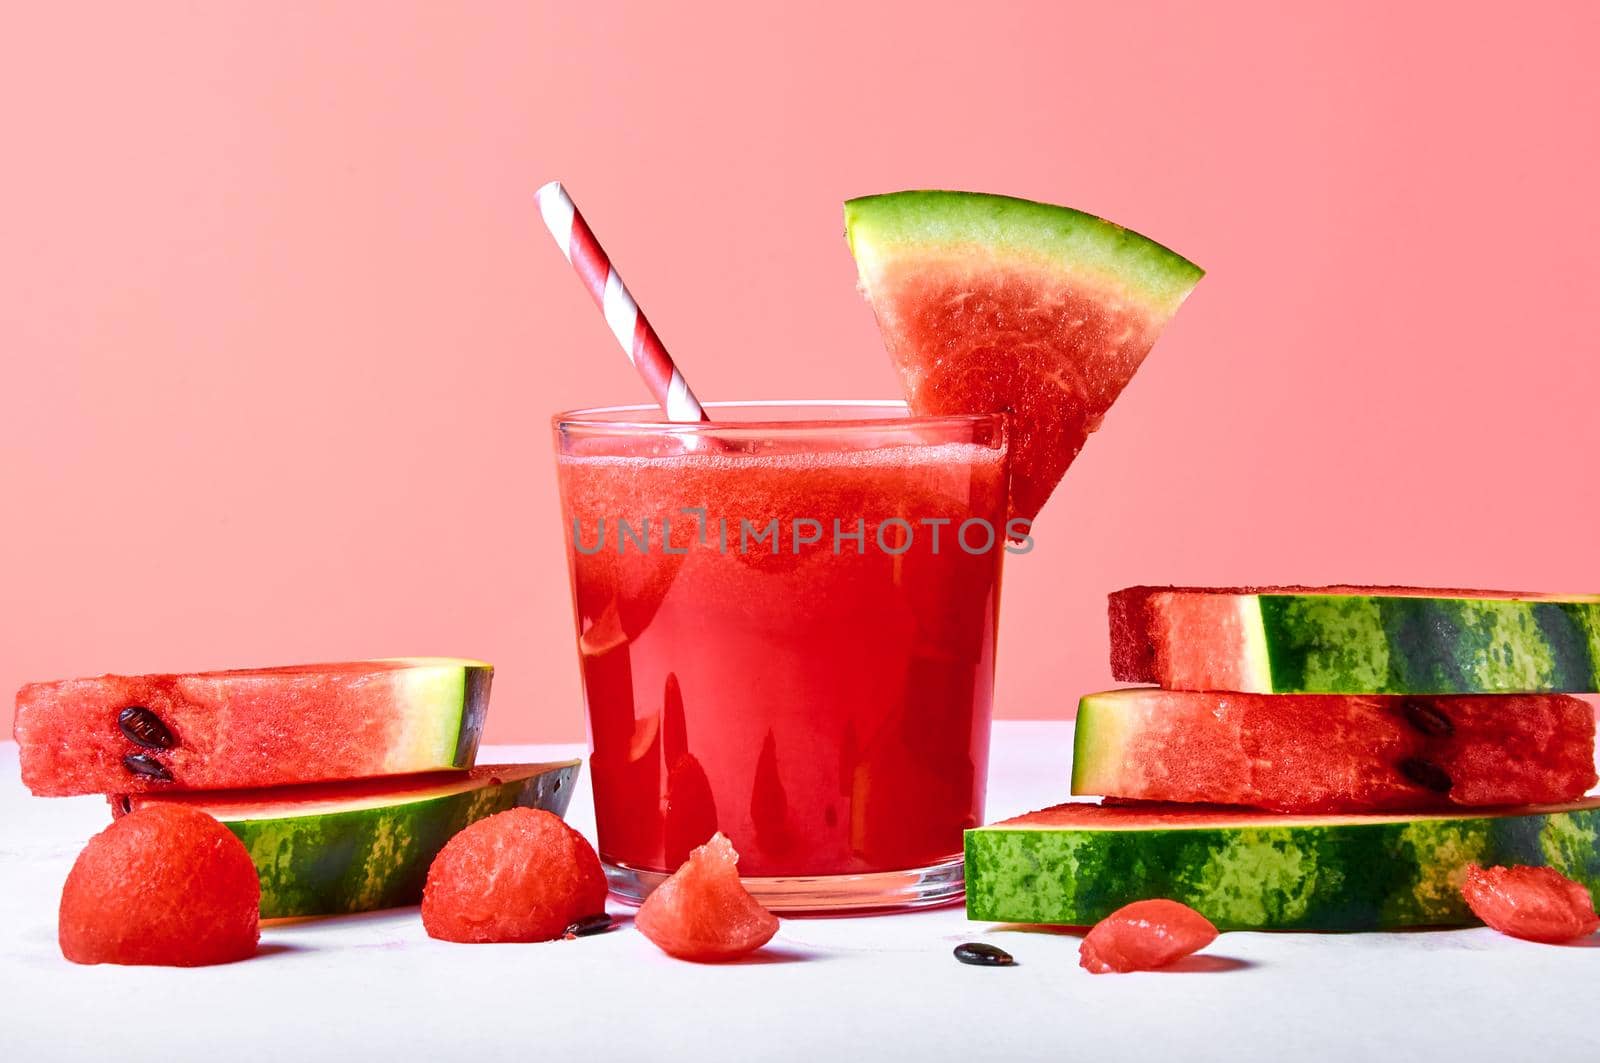 Close-up fresh watermelon juice or smoothie in glasses with watermelon pieces on pink background. Refreshing summer drink.